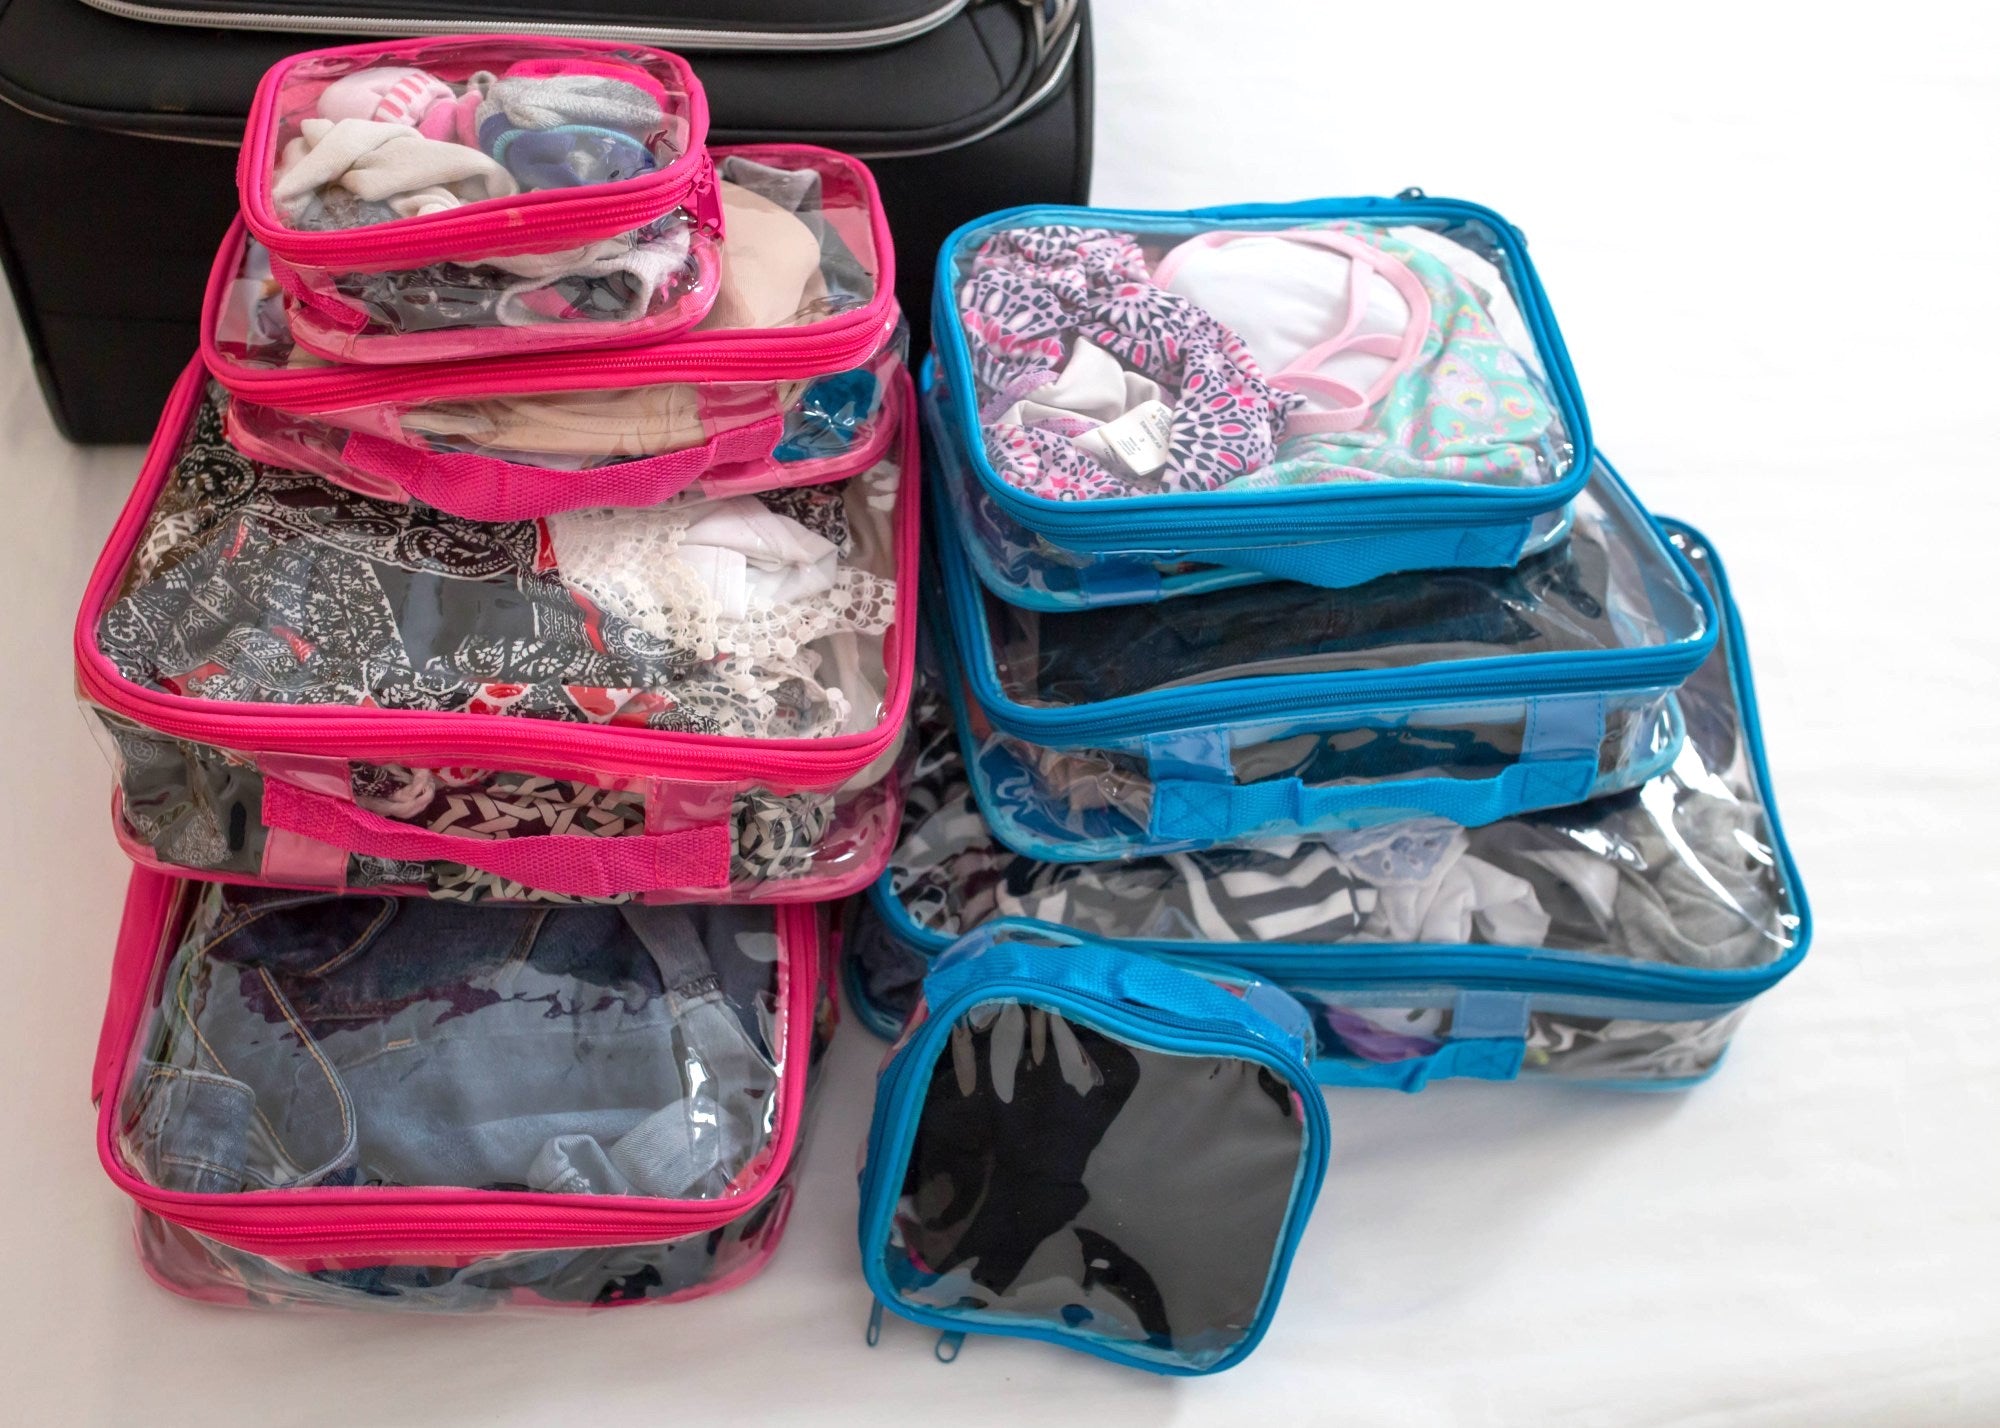 Complete Bundle for checked suitcase organization